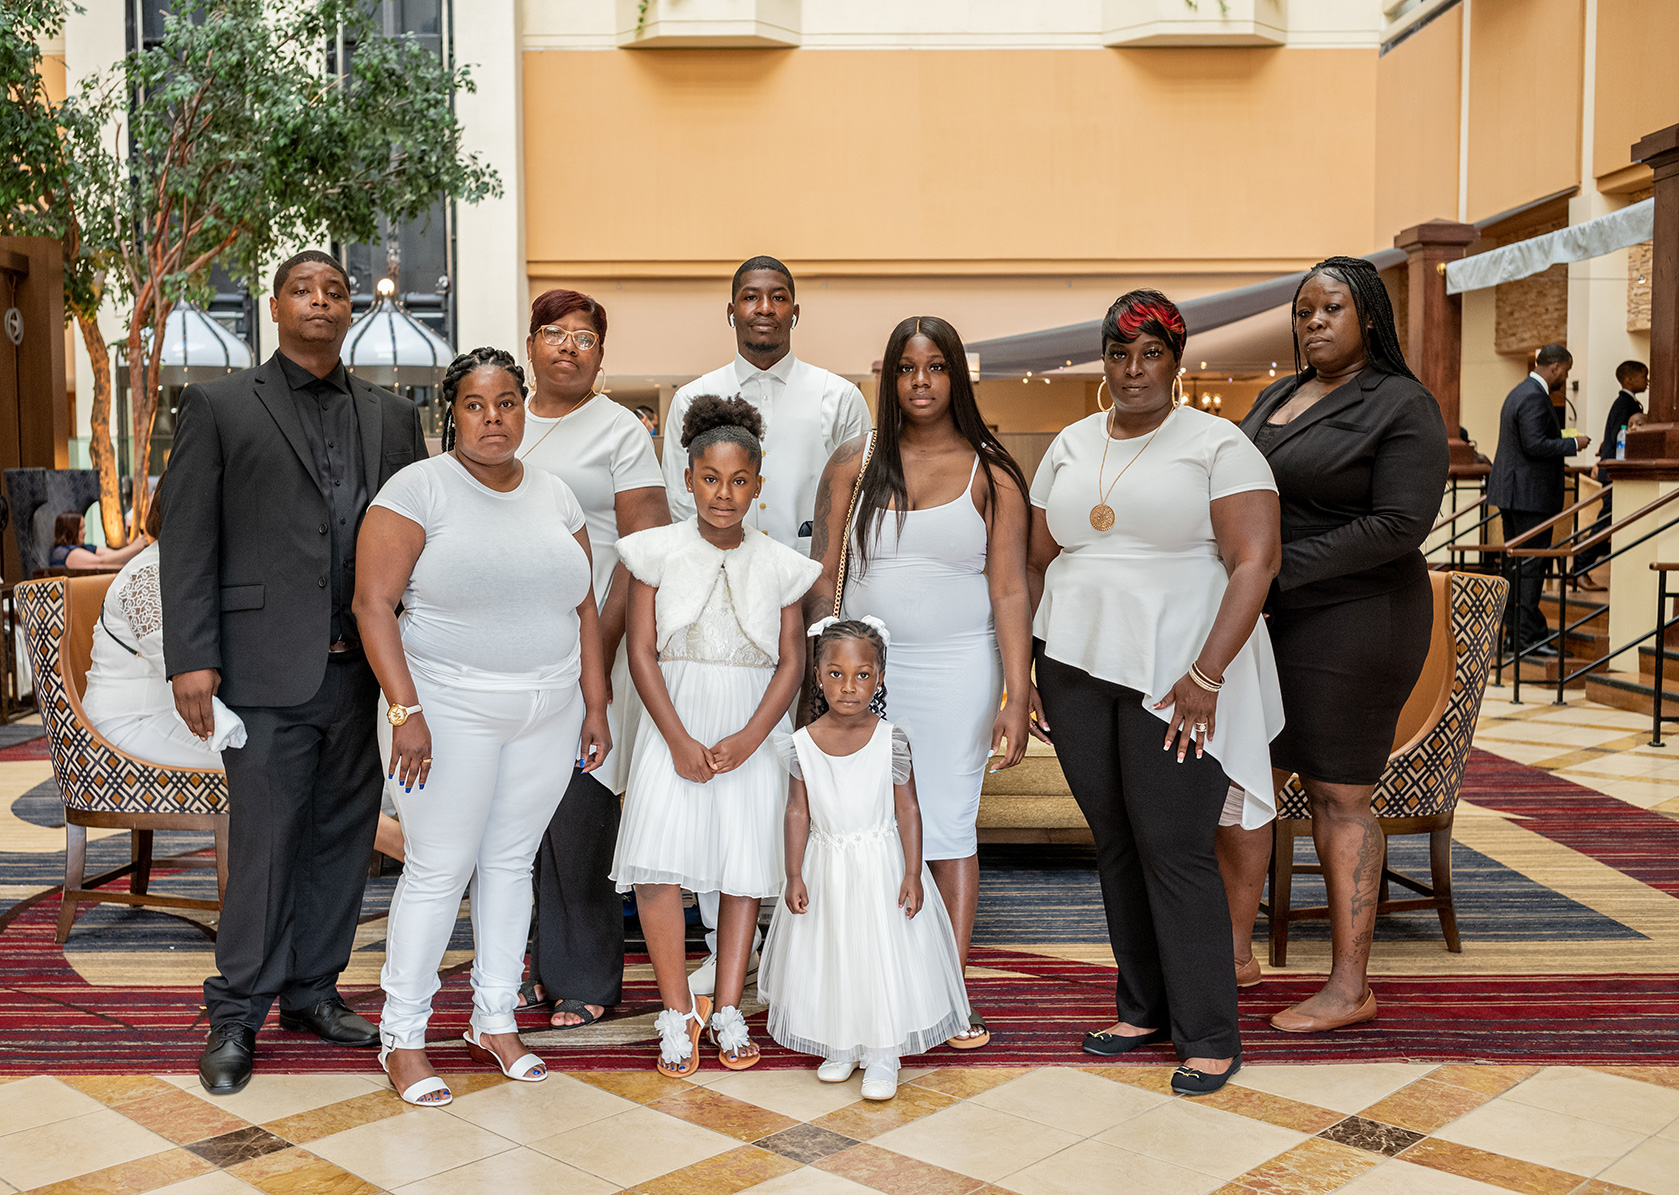 Quincy Mason and his family pose for a photo before the funeral on June 9. (Ruddy Roye for TIME)